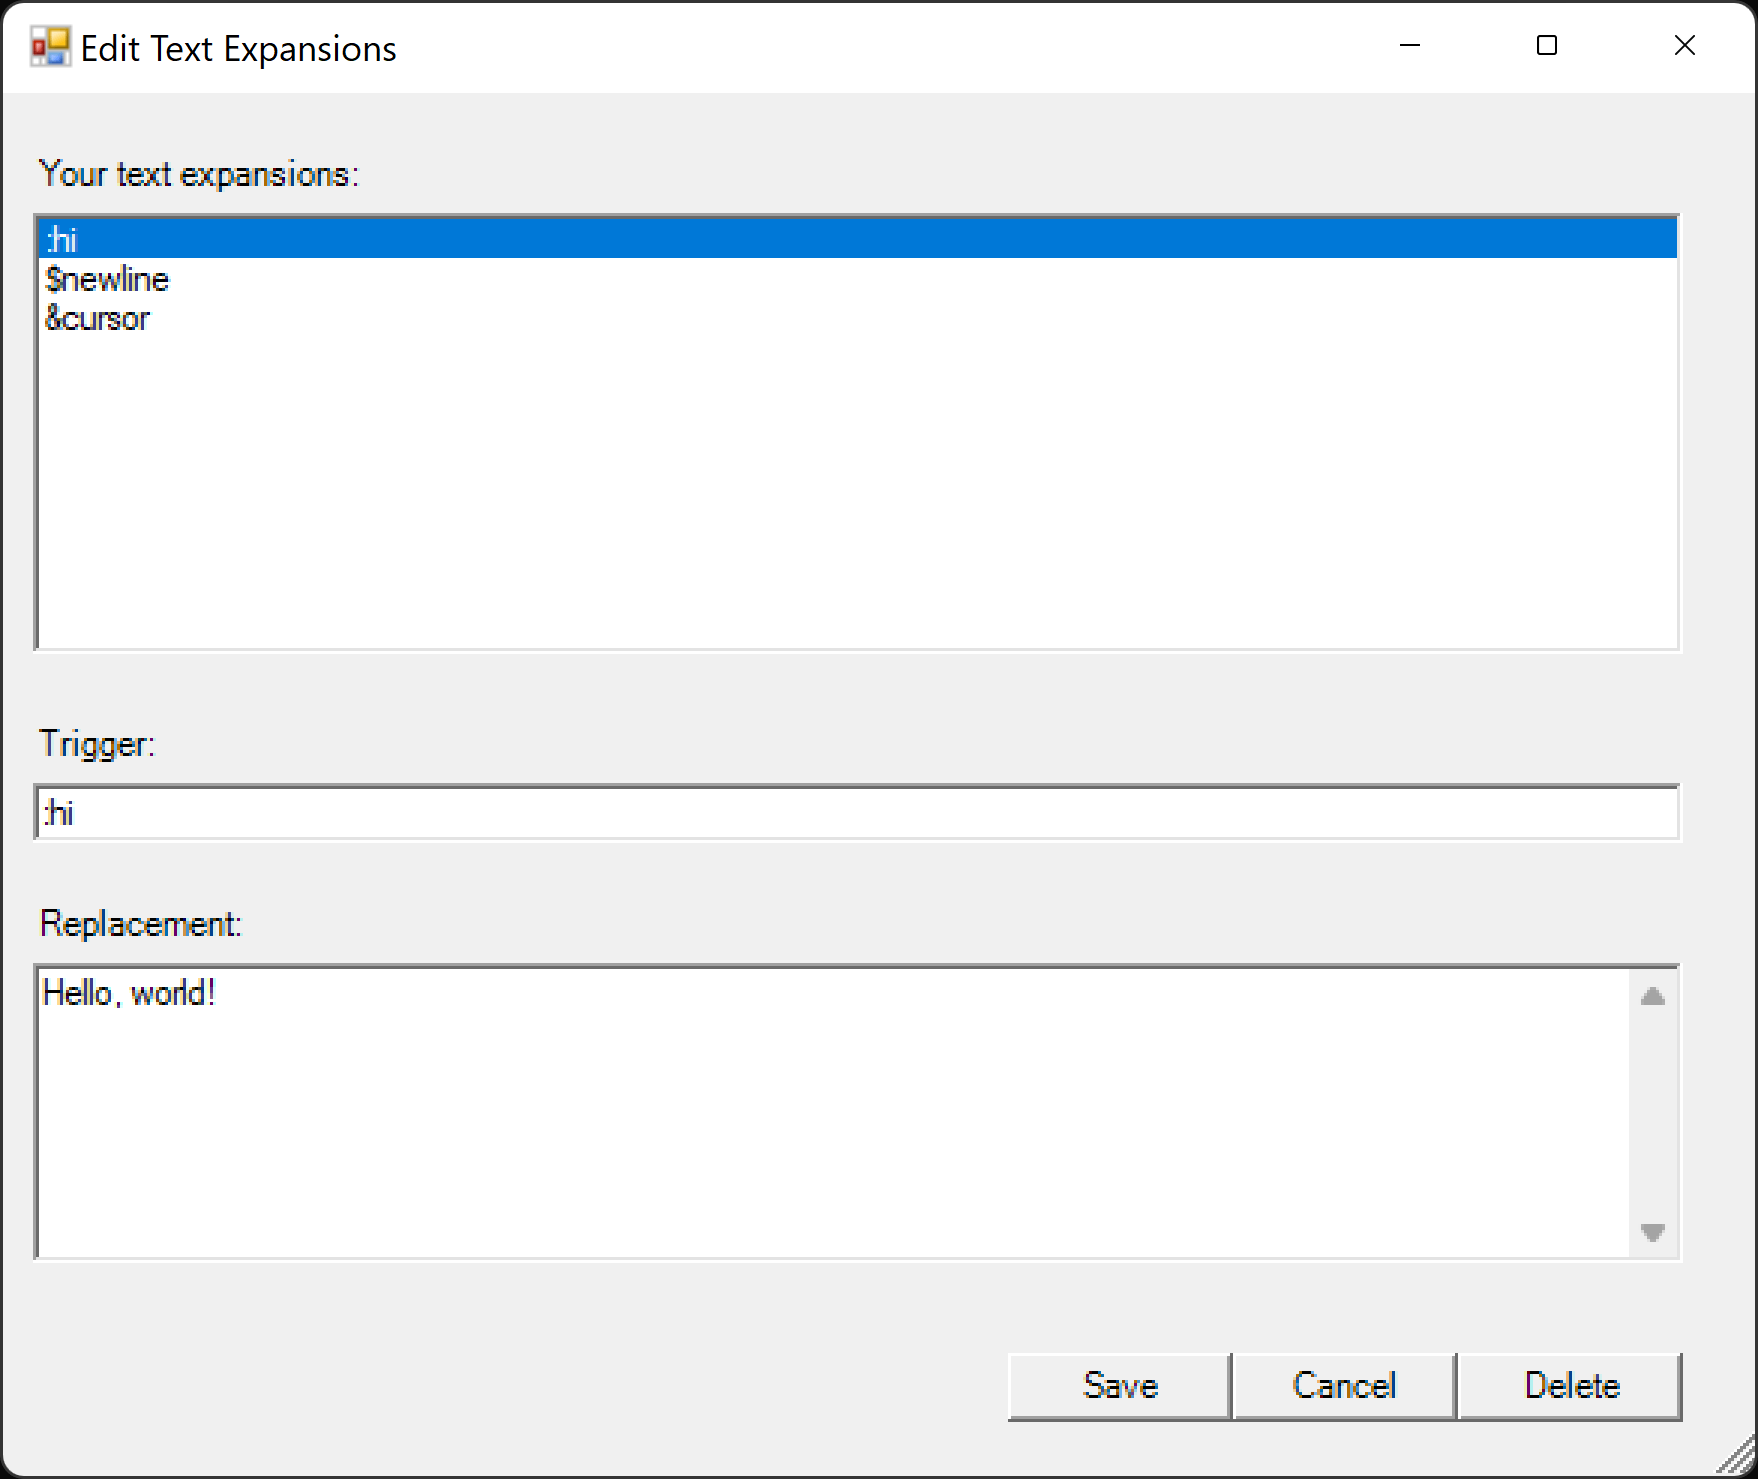 GUI for editing or deleting text expansions